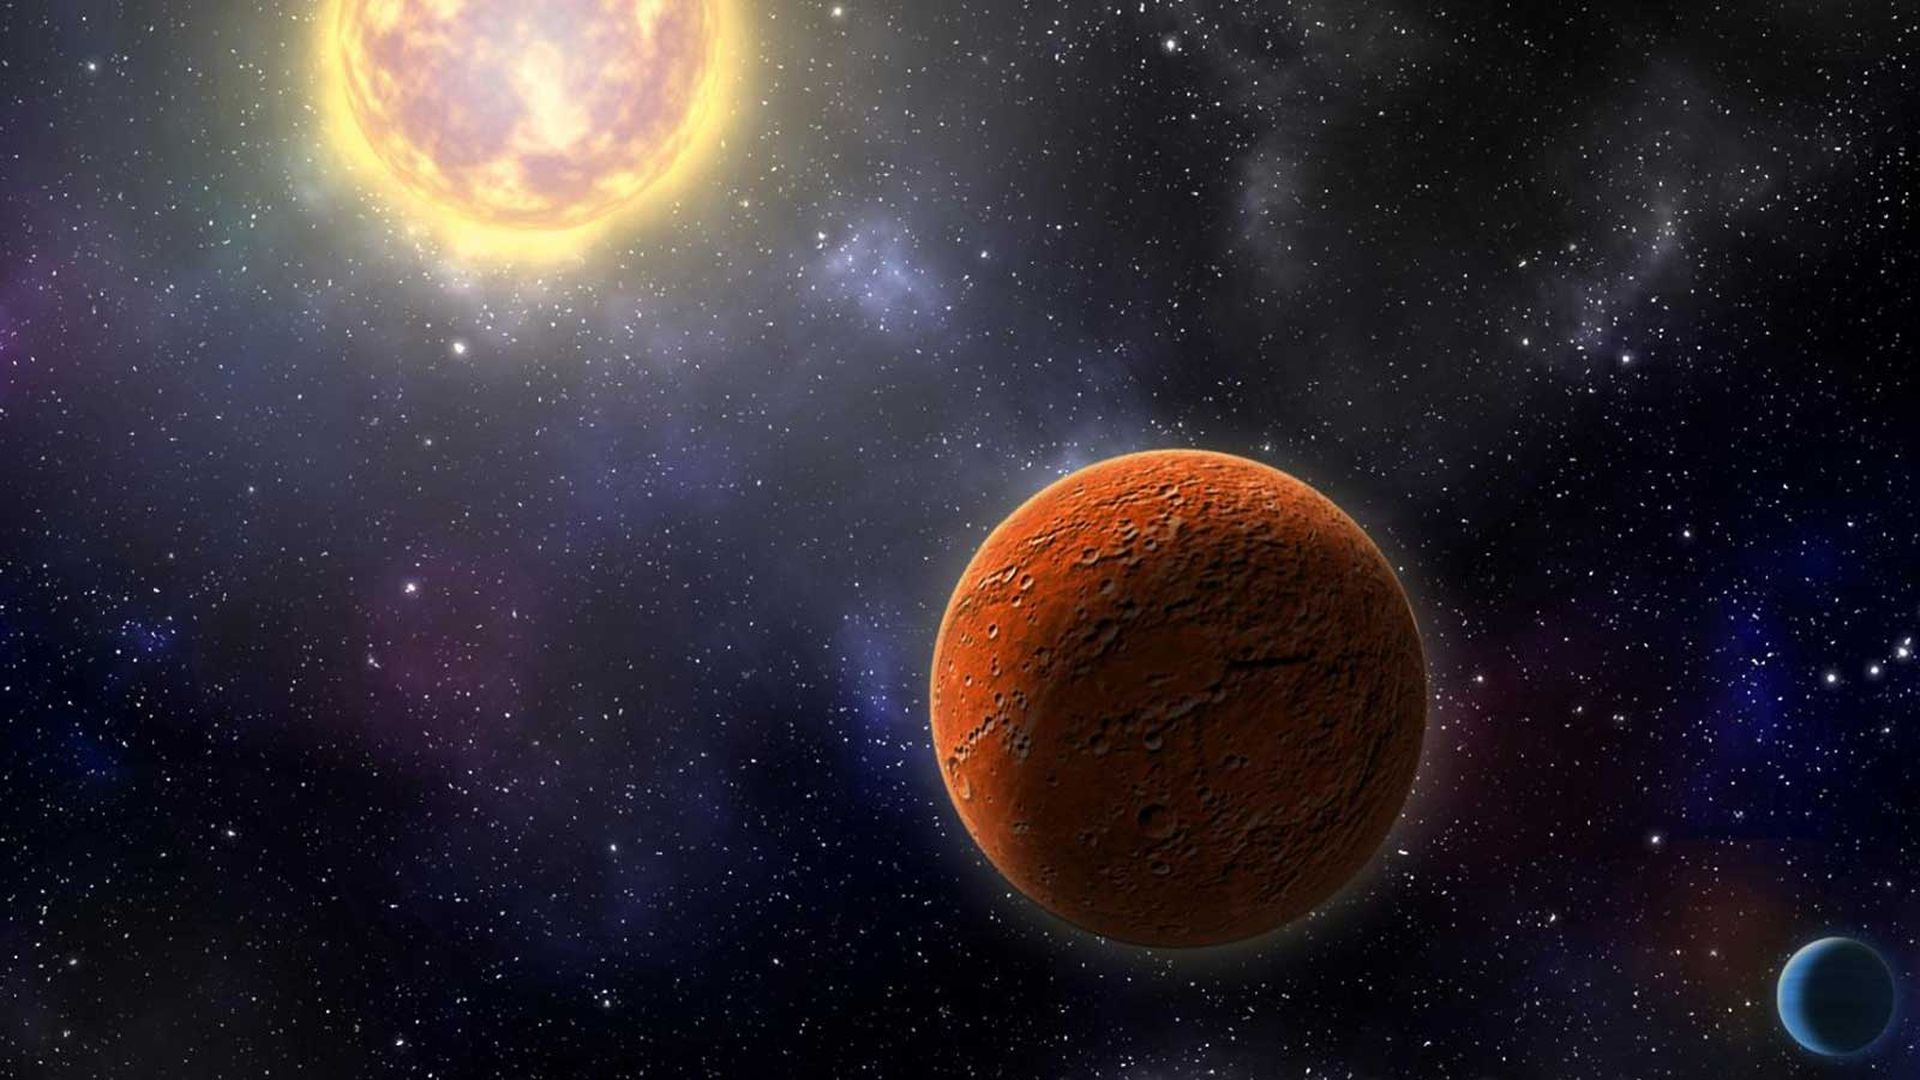 In this image, a red planet orbits a bright yellow sun. 